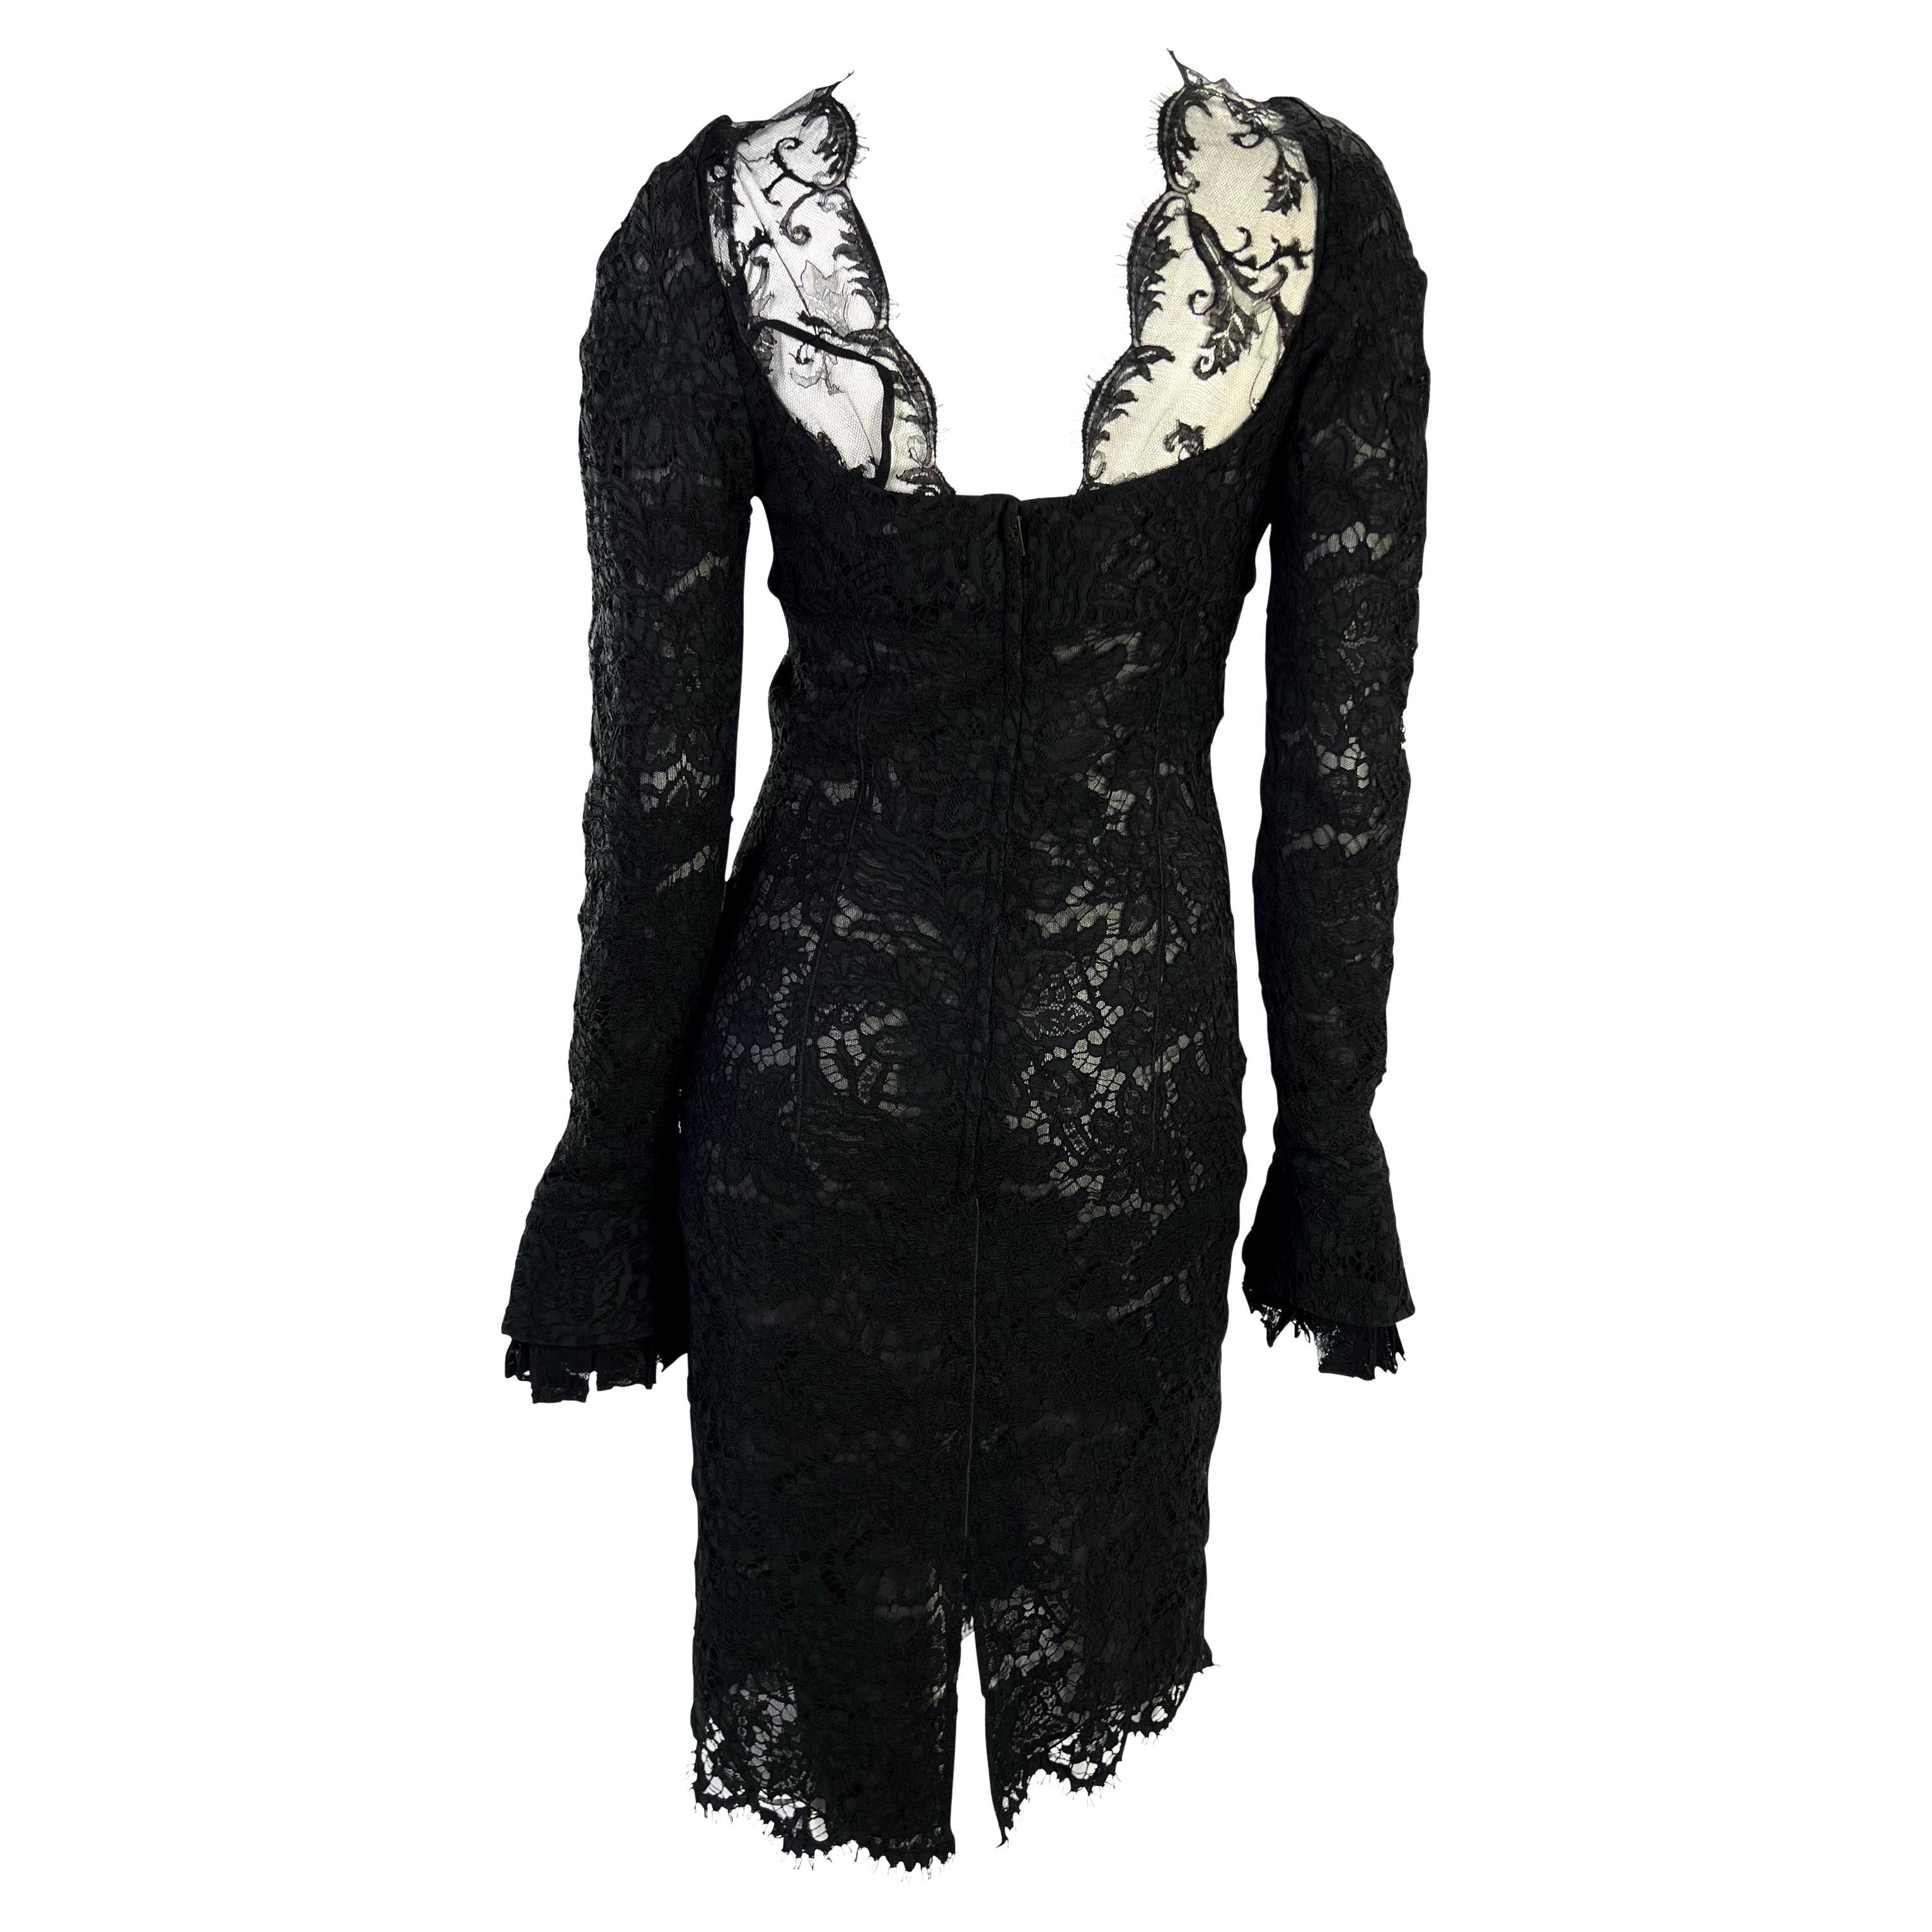 NWT F/W 2002 Yves Saint Laurent by Tom Ford Runway Sheer Lace Dress In New Condition For Sale In West Hollywood, CA